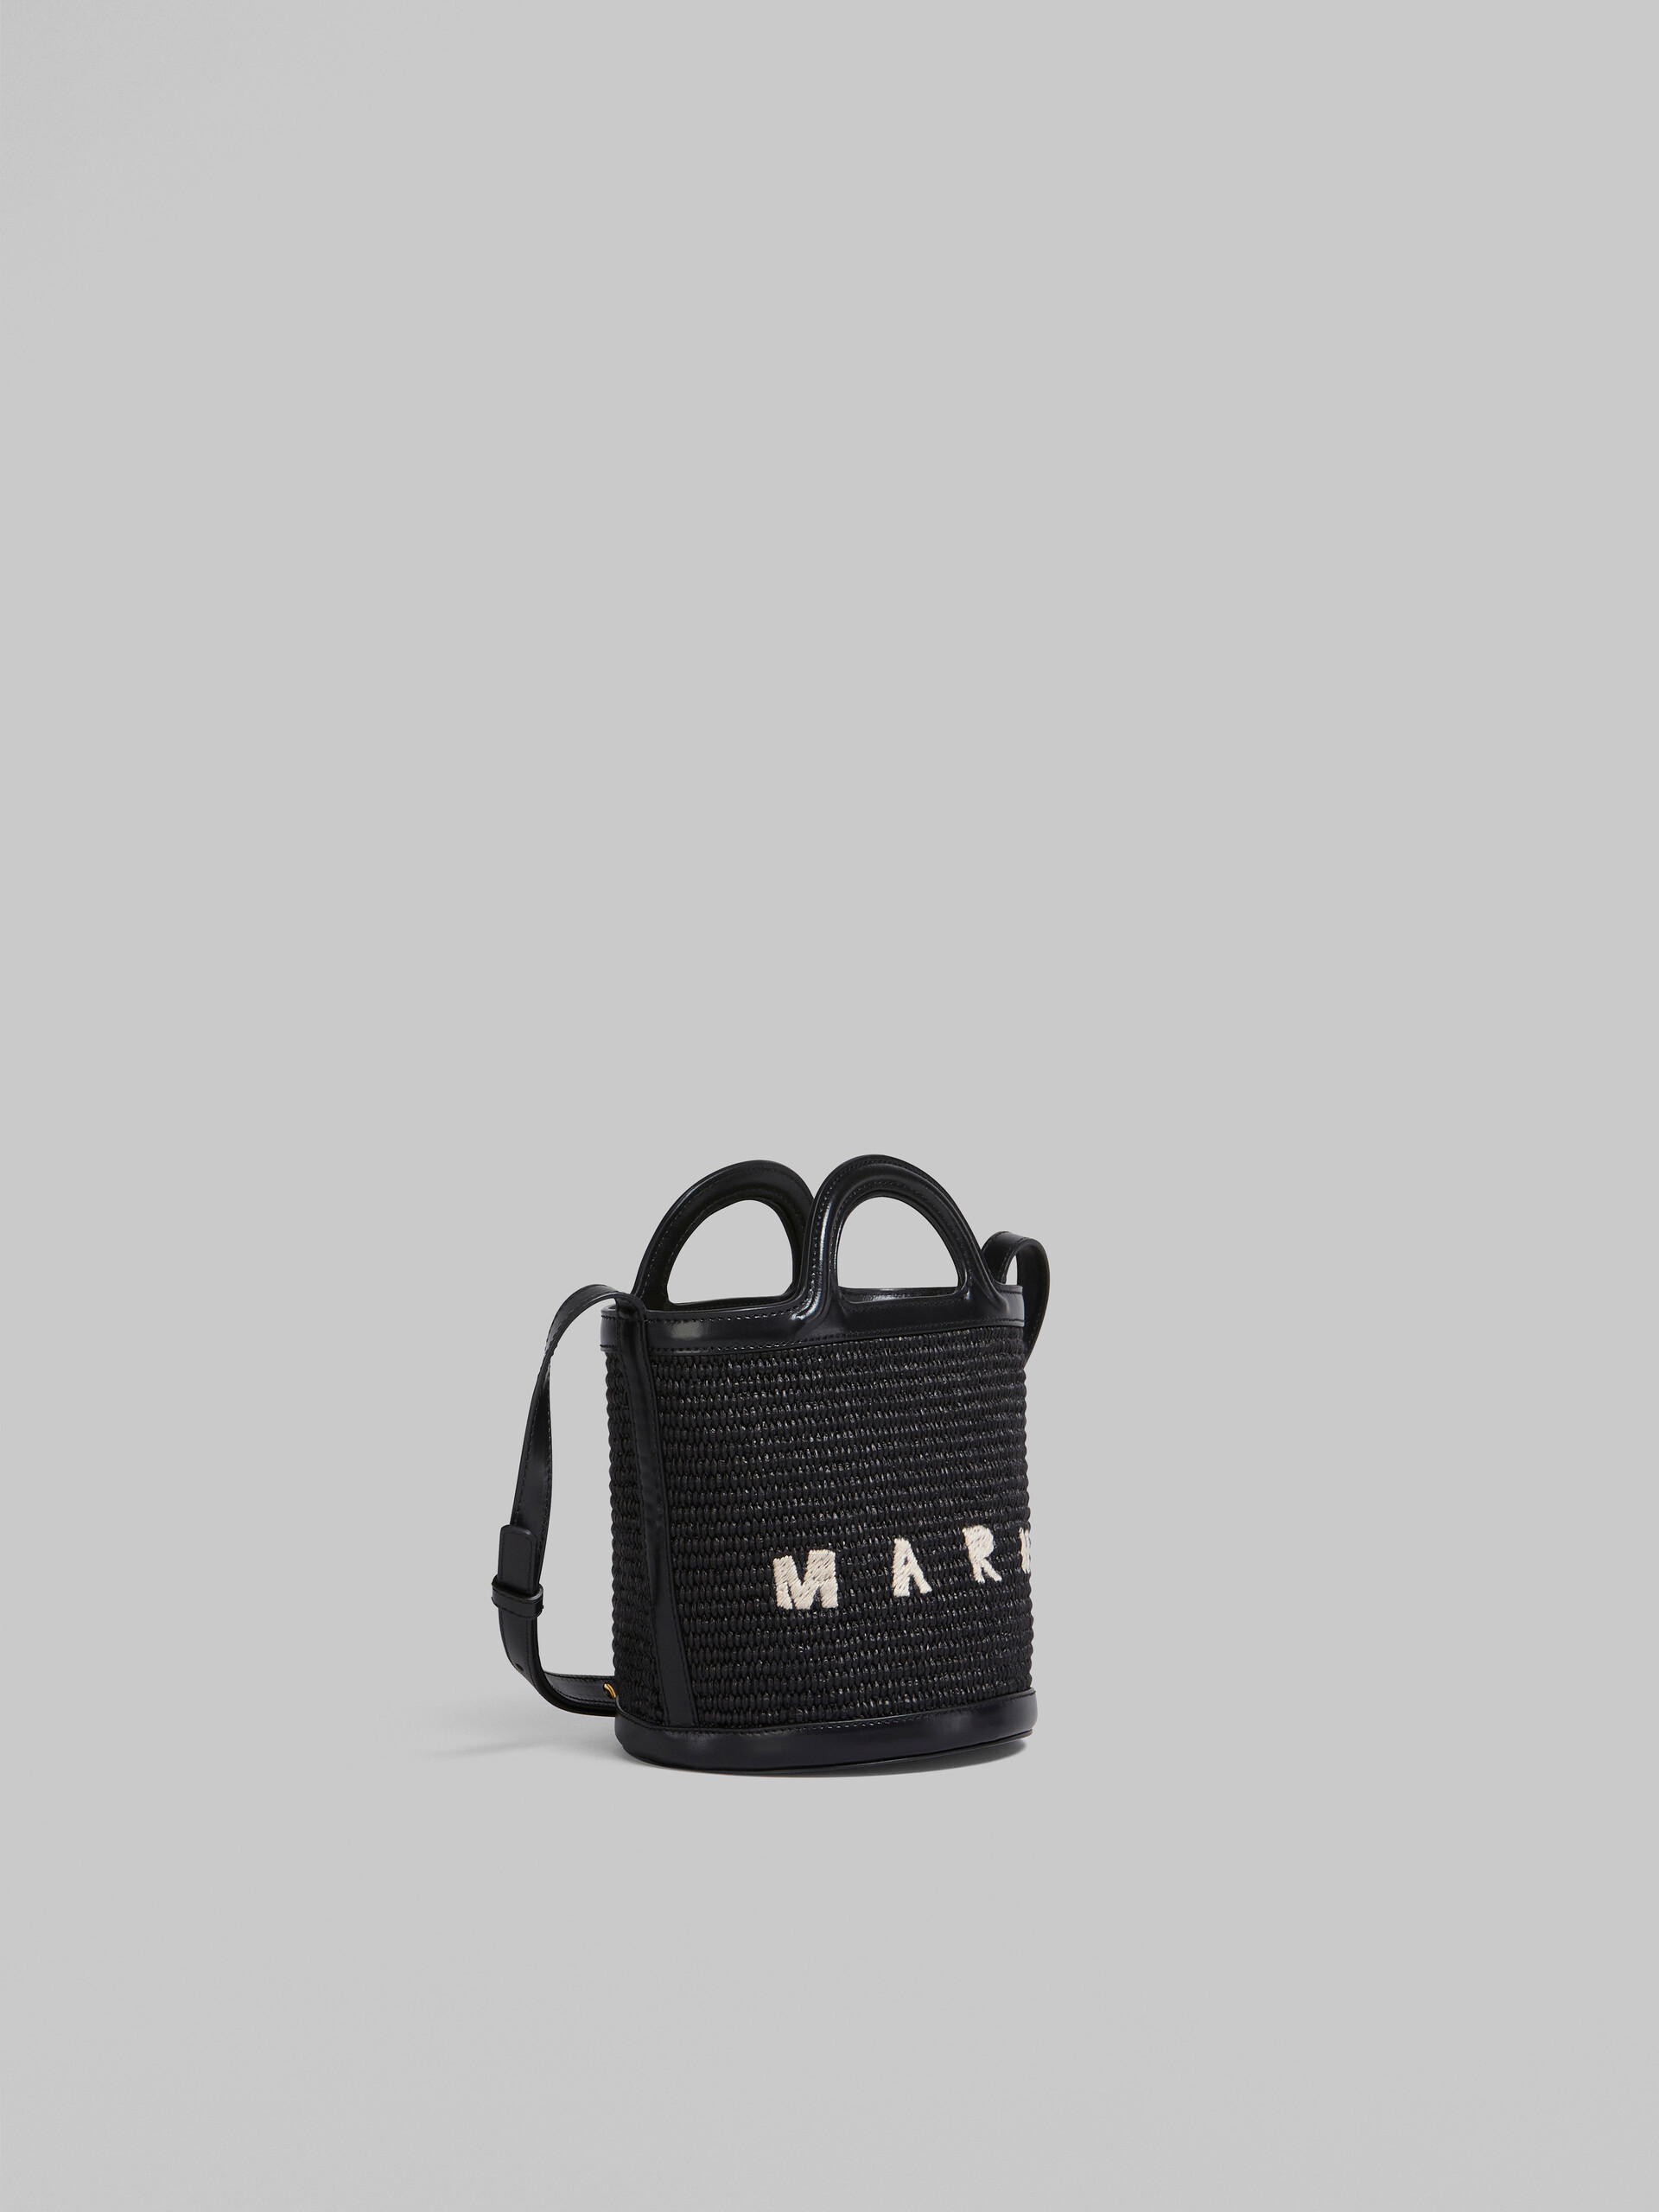 Tropicalia Small Bucket Bag in black leather and raffia - Shoulder Bags - Image 5